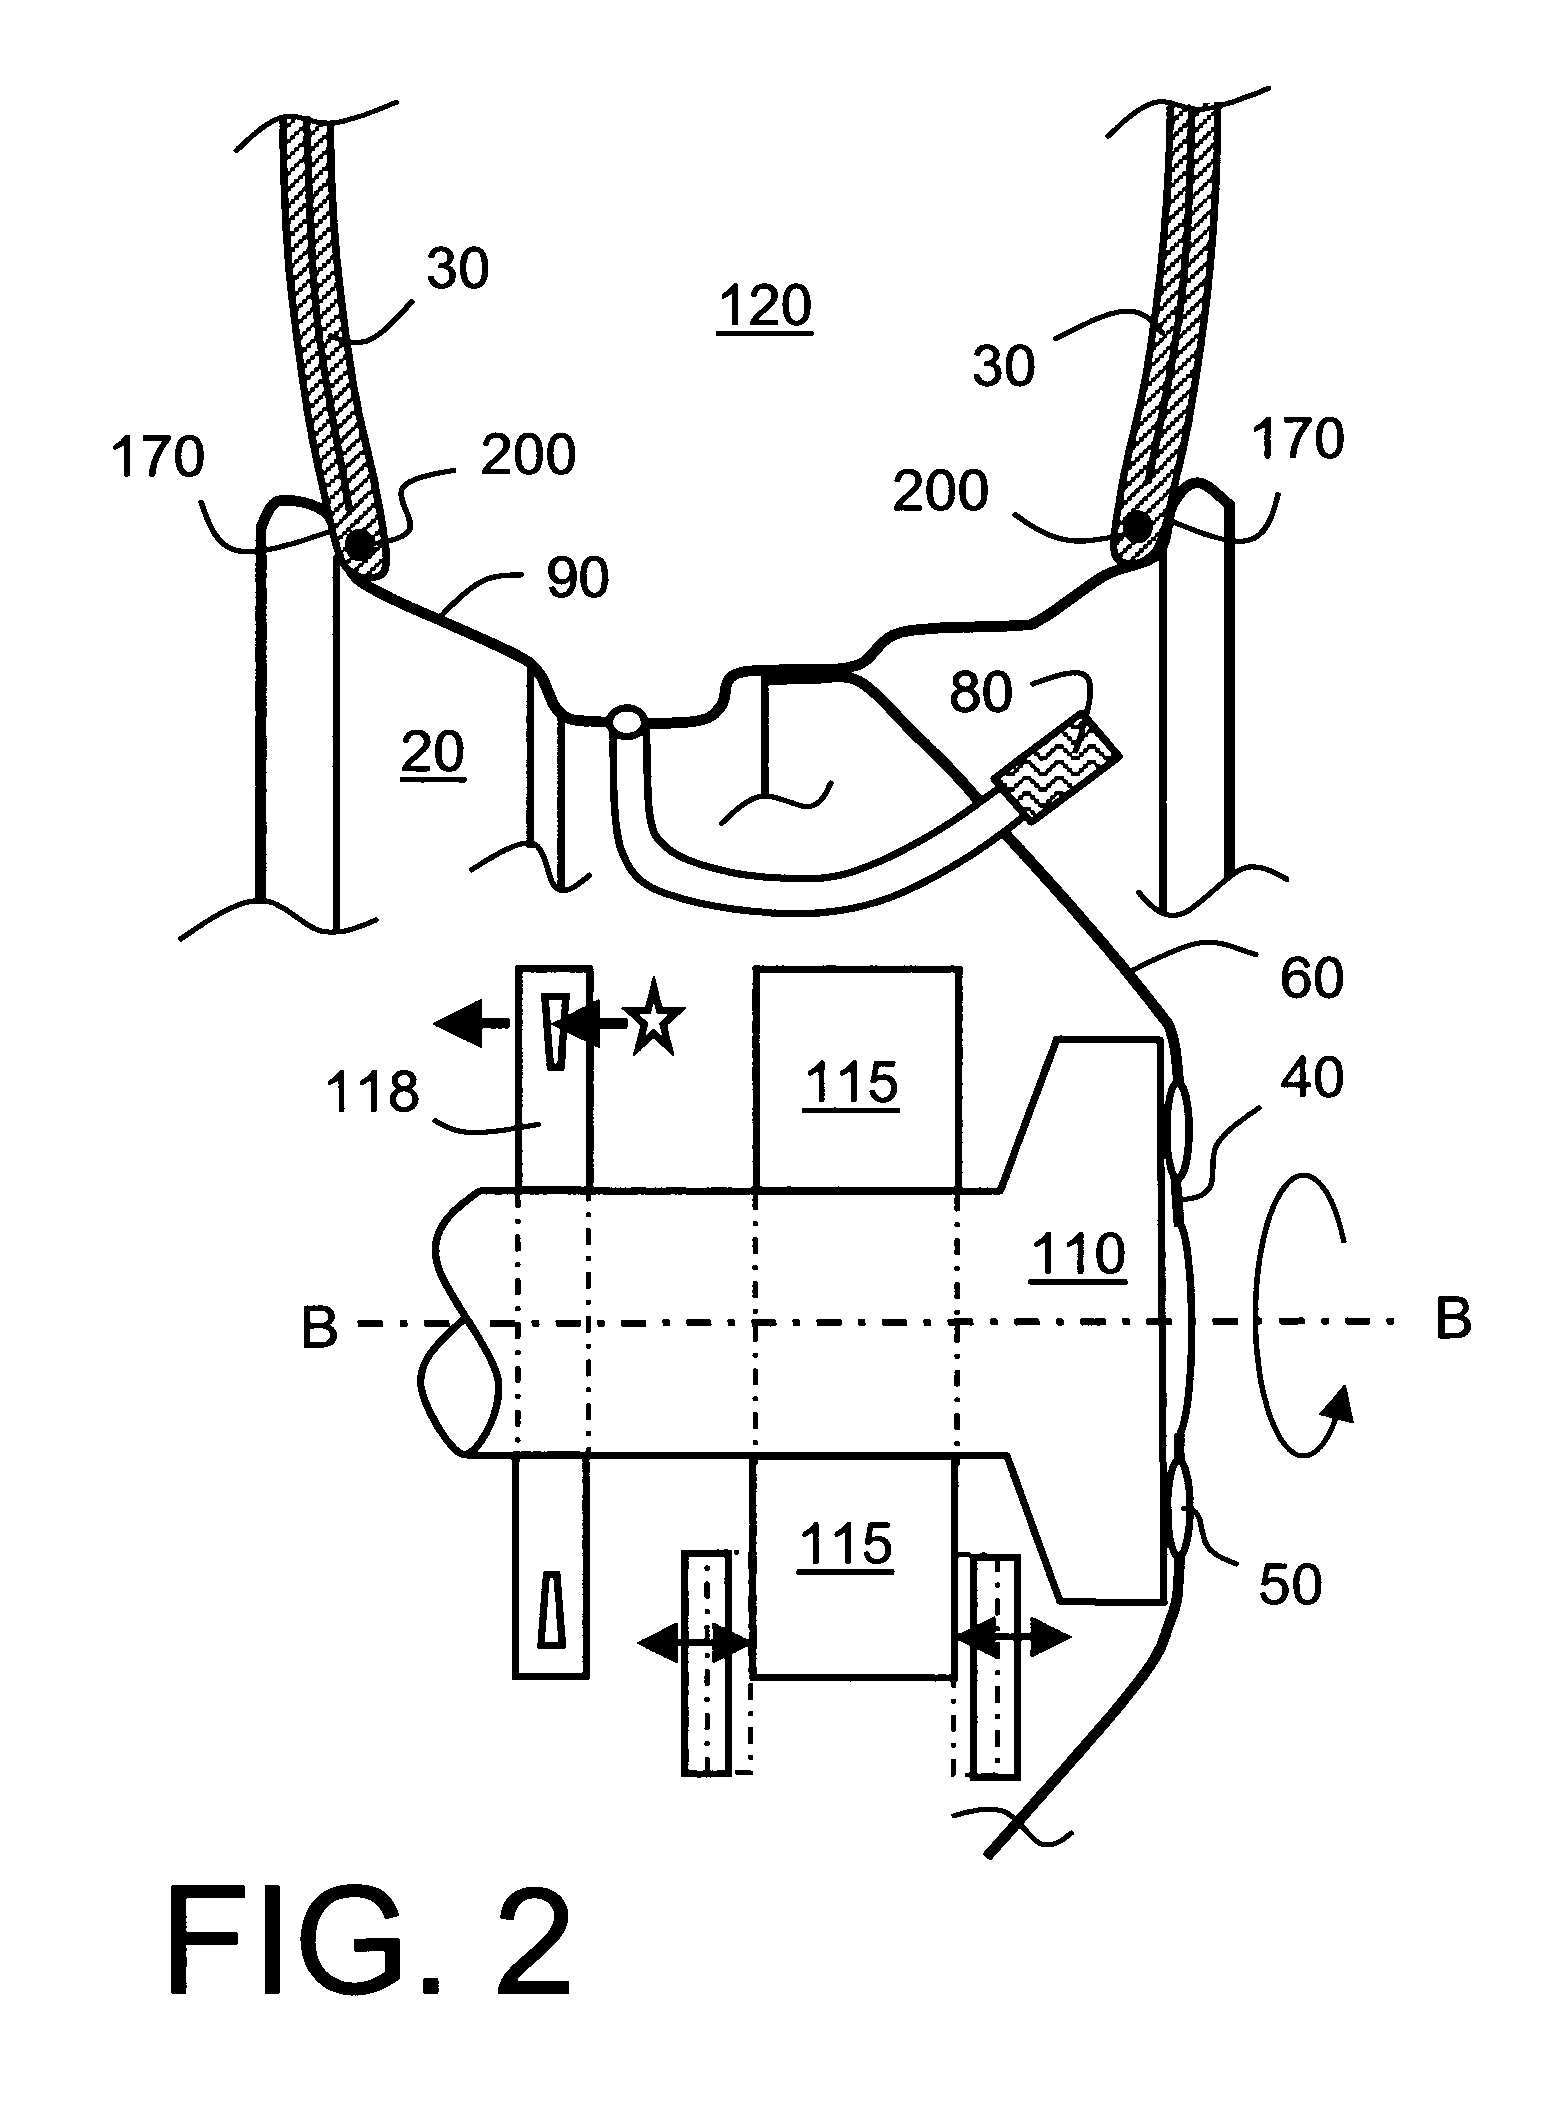 Method of identifying positions of wheel modules